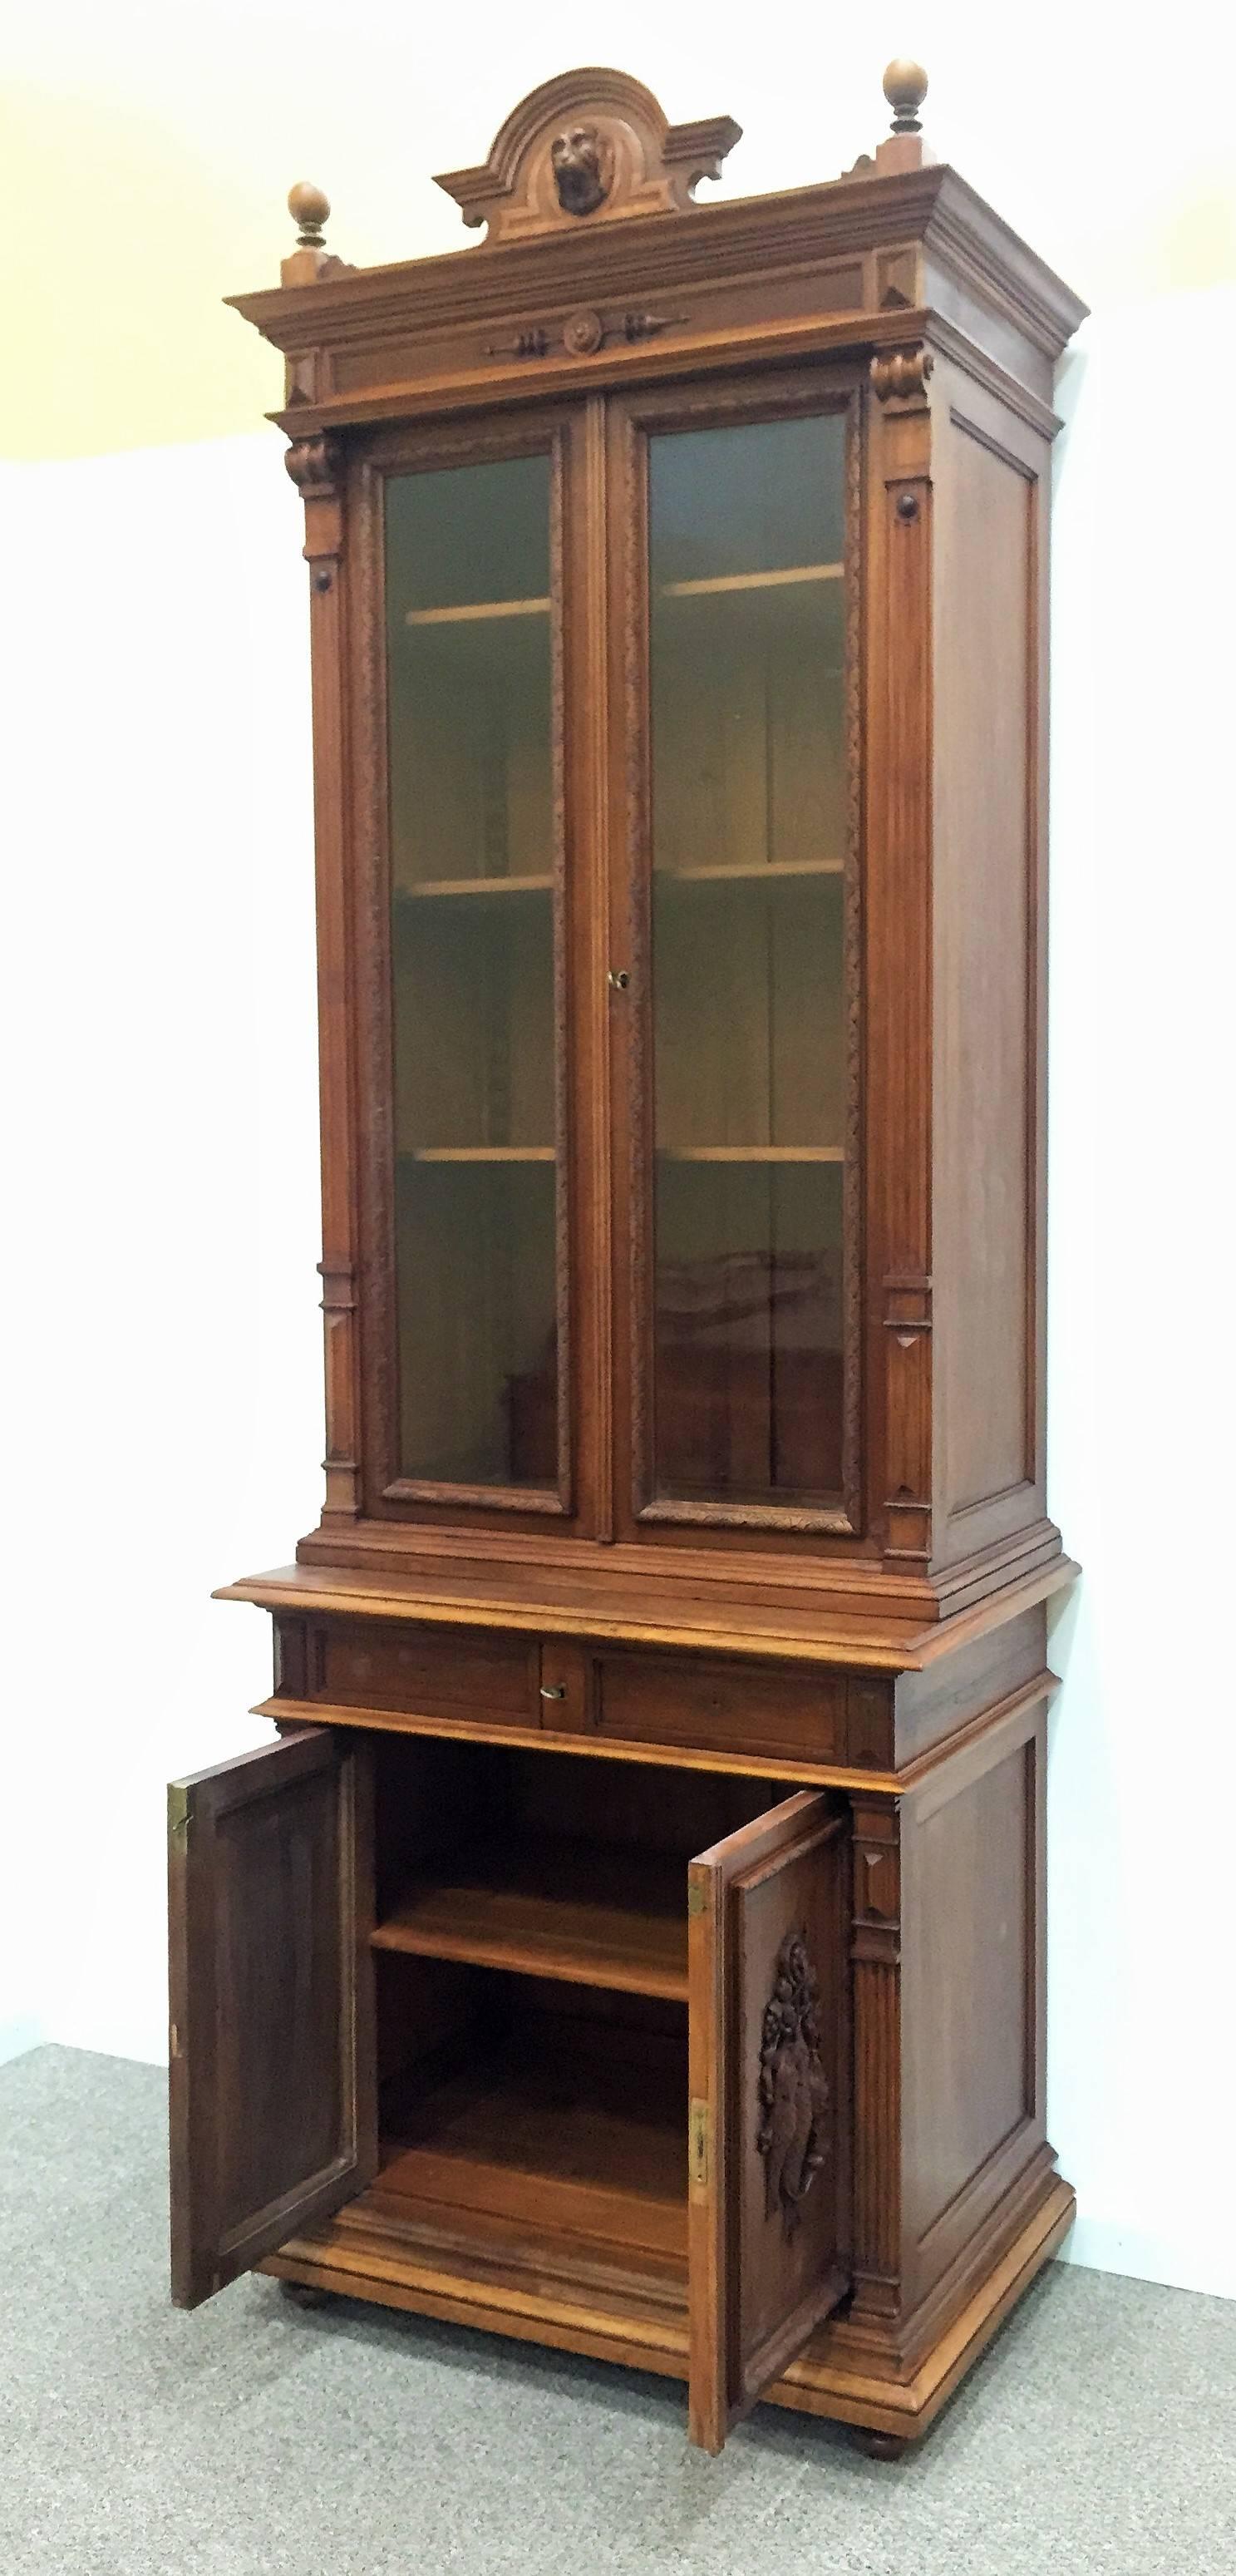 Phenomenal original antique French Louis Philippe cabinet, bibliotheque or showcase. This fine antique offers an unusual height of almost 10 feet generously offering a plethora of storage and display opportunities. Two antique wavy glass doors up